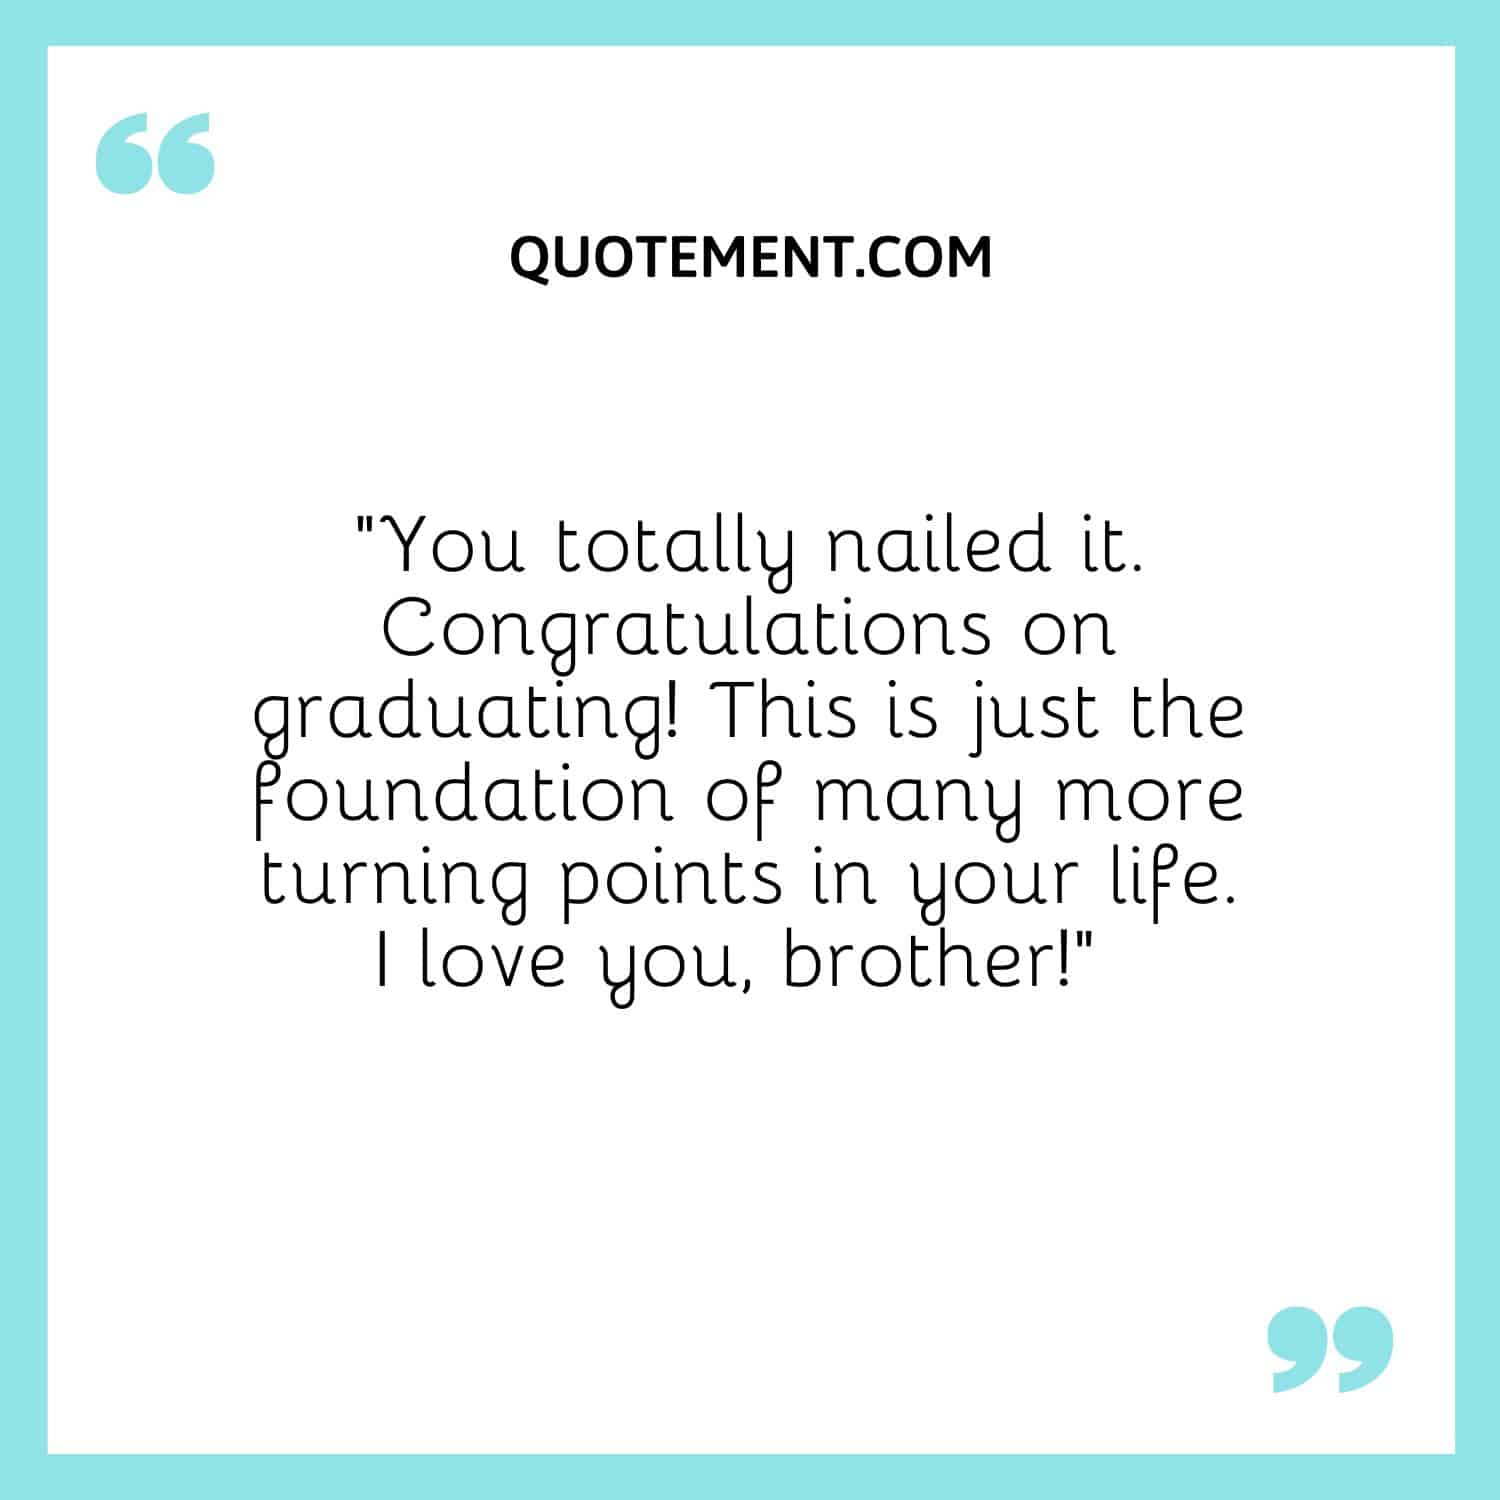 “You totally nailed it. Congratulations on graduating! This is just the foundation of many more turning points in your life. I love you, brother!” 